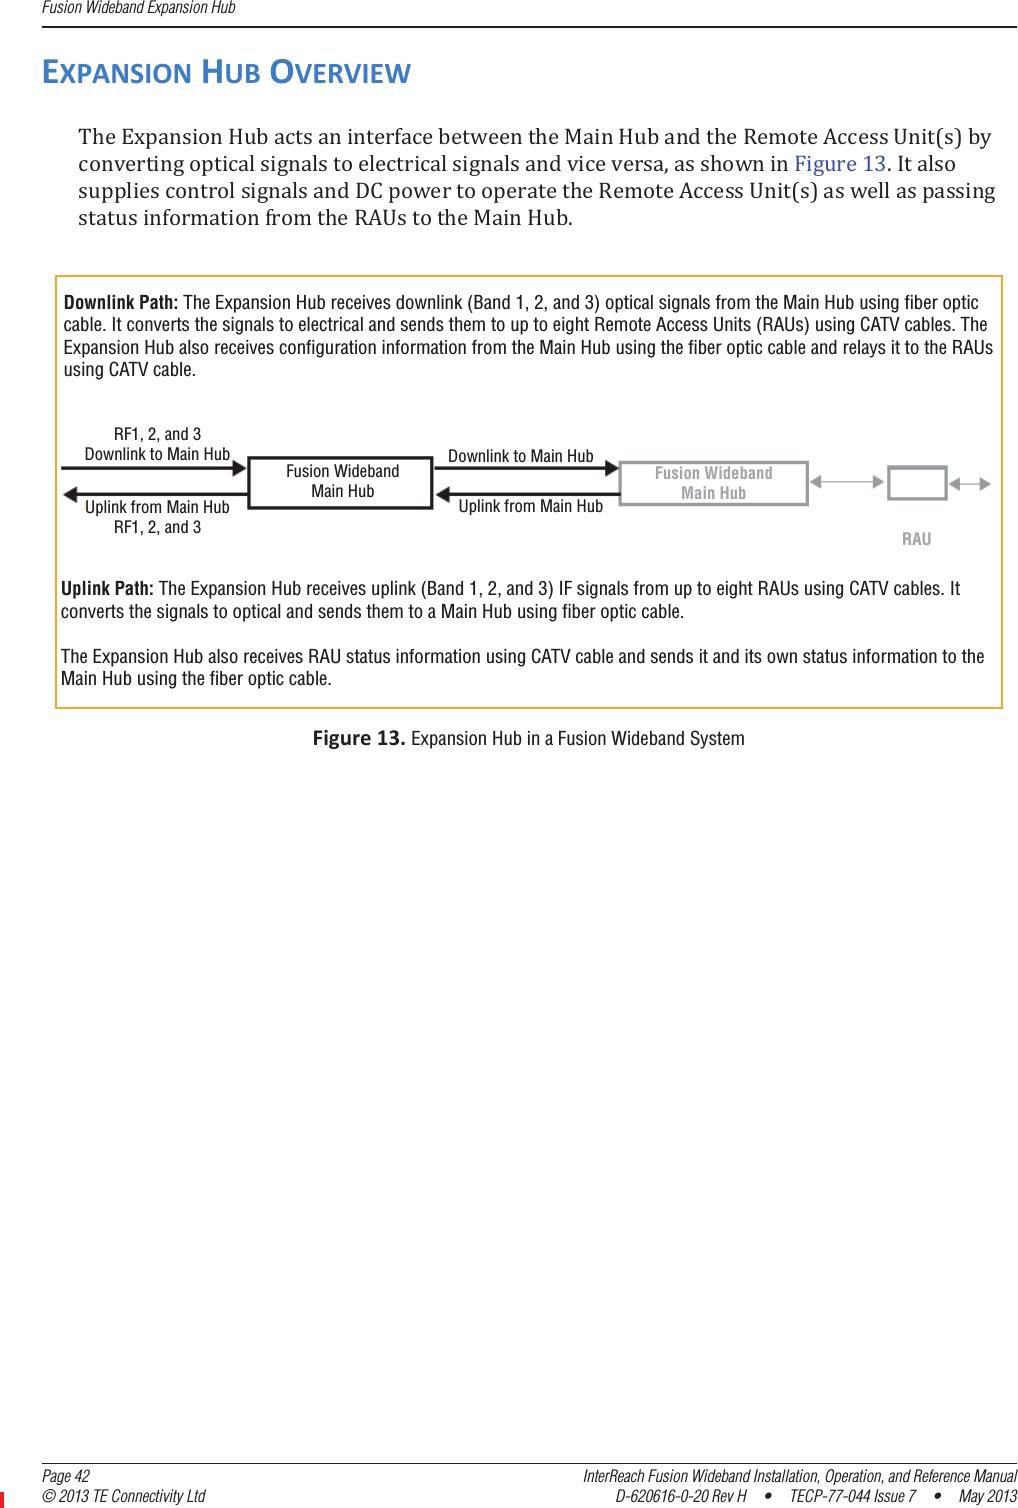 Fusion Wideband Expansion Hub  Page 42 InterReach Fusion Wideband Installation, Operation, and Reference Manual© 2013 TE Connectivity Ltd D-620616-0-20 Rev H  •  TECP-77-044 Issue 7  •  May 2013EXPANSIONHUBOVERVIEWȋȌǡͳ͵ǤȋȌǤFigure13.Expansion Hub in a Fusion Wideband SystemDownlink Path: The Expansion Hub receives downlink (Band 1, 2, and 3) optical signals from the Main Hub using fiber optic cable. It converts the signals to electrical and sends them to up to eight Remote Access Units (RAUs) using CATV cables. The Expansion Hub also receives configuration information from the Main Hub using the fiber optic cable and relays it to the RAUs using CATV cable.Uplink Path: The Expansion Hub receives uplink (Band 1, 2, and 3) IF signals from up to eight RAUs using CATV cables. It converts the signals to optical and sends them to a Main Hub using fiber optic cable.The Expansion Hub also receives RAU status information using CATV cable and sends it and its own status information to the Main Hub using the fiber optic cable.RF1, 2, and 3Downlink to Main HubUplink from Main HubRF1, 2, and 3Downlink to Main HubUplink from Main HubFusion WidebandMain HubFusion WidebandMain HubRAU